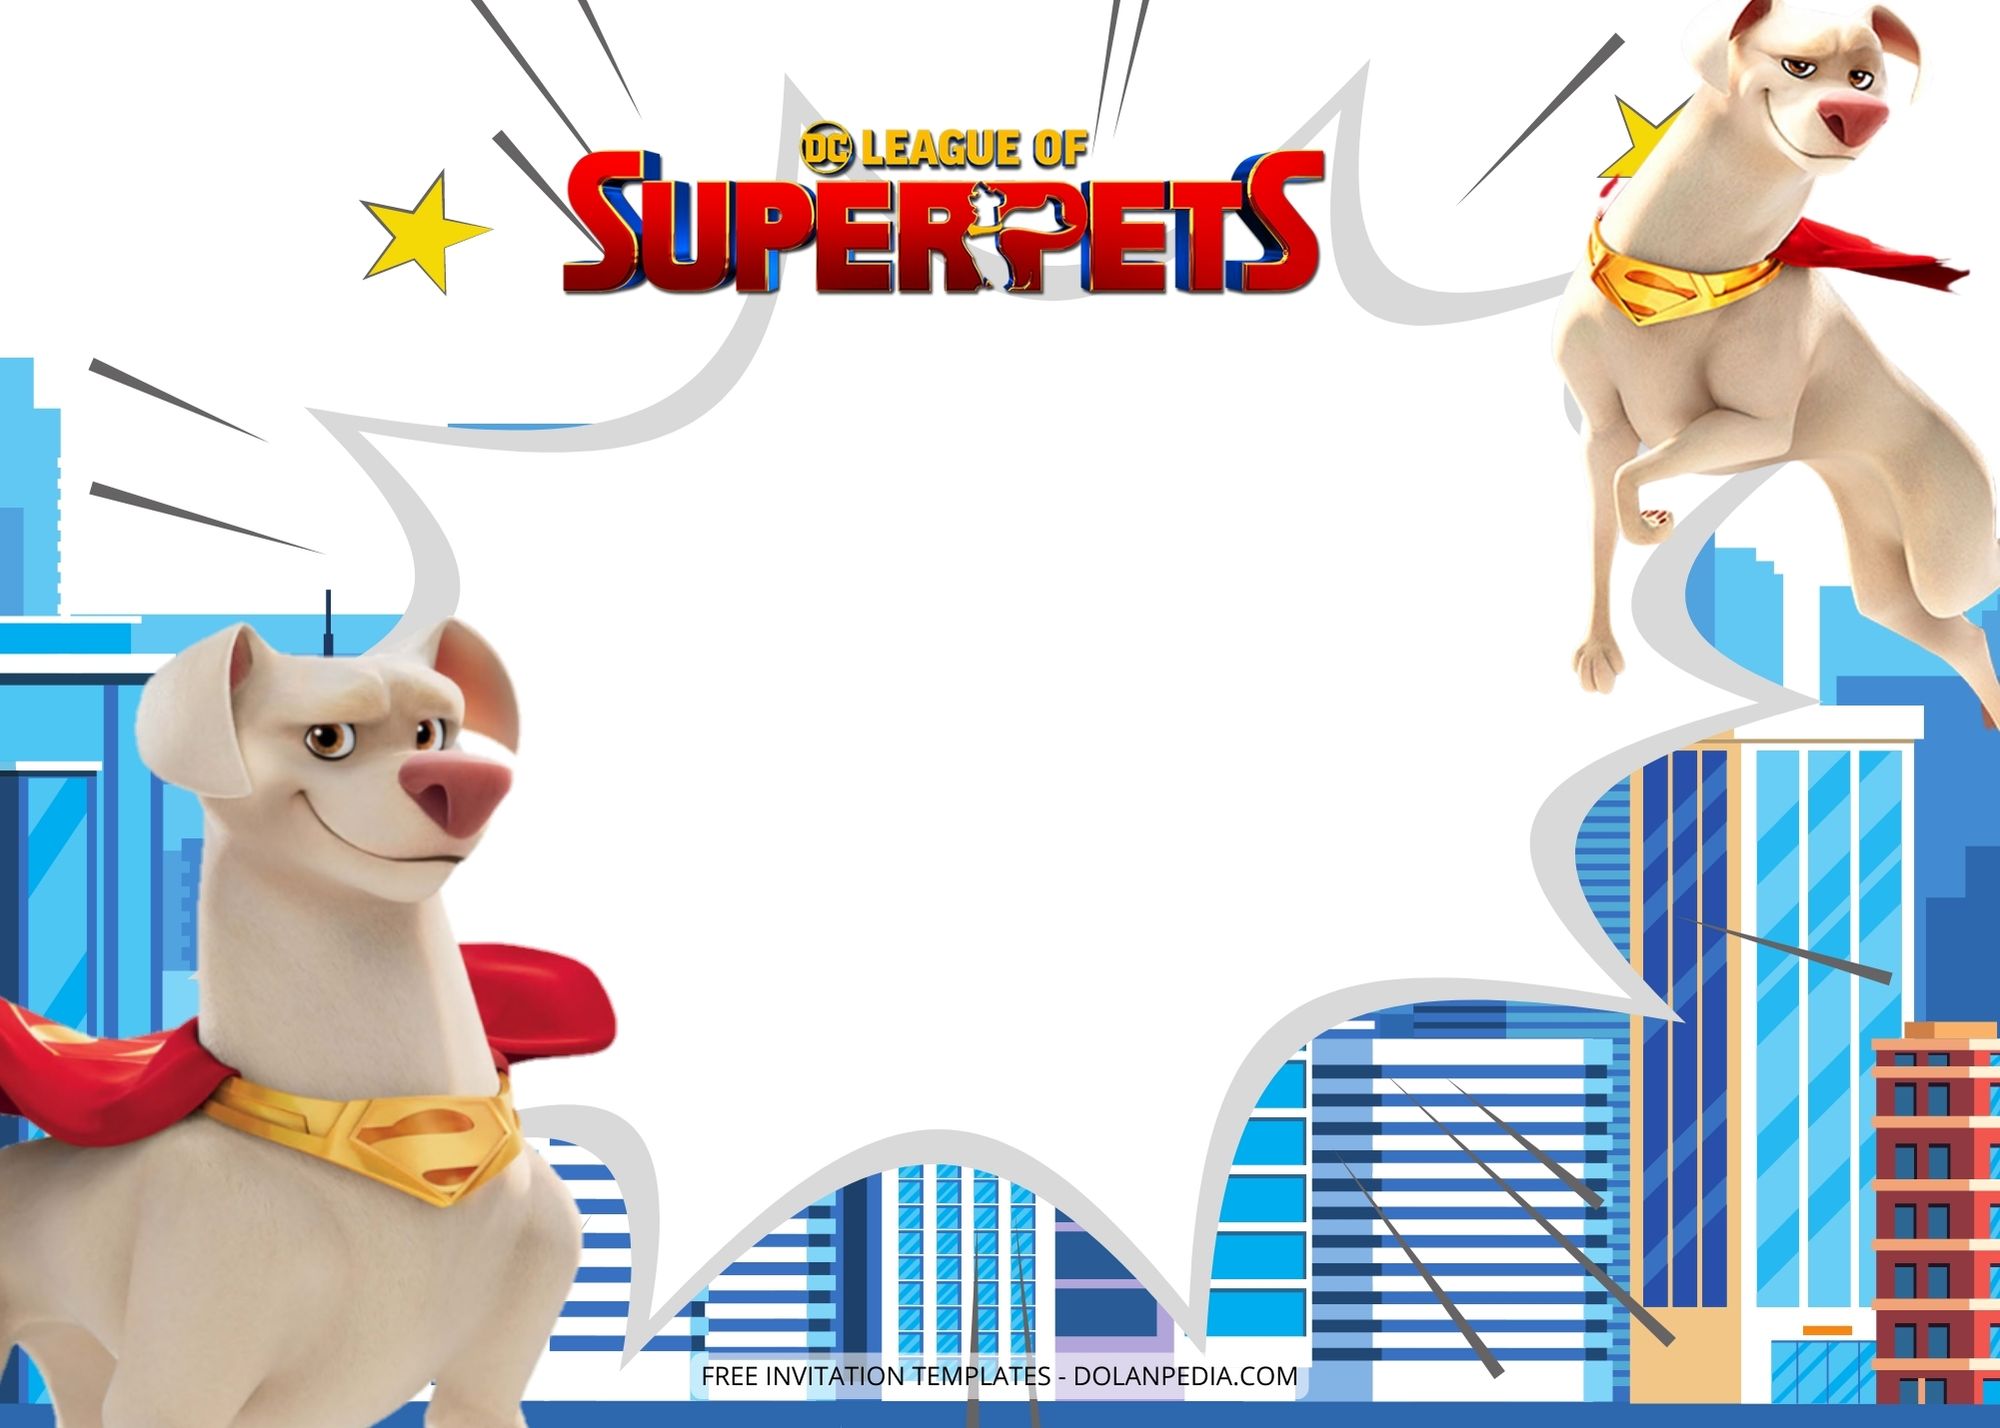 Blank DC League Super Pets Birthday Party Invitation FIve